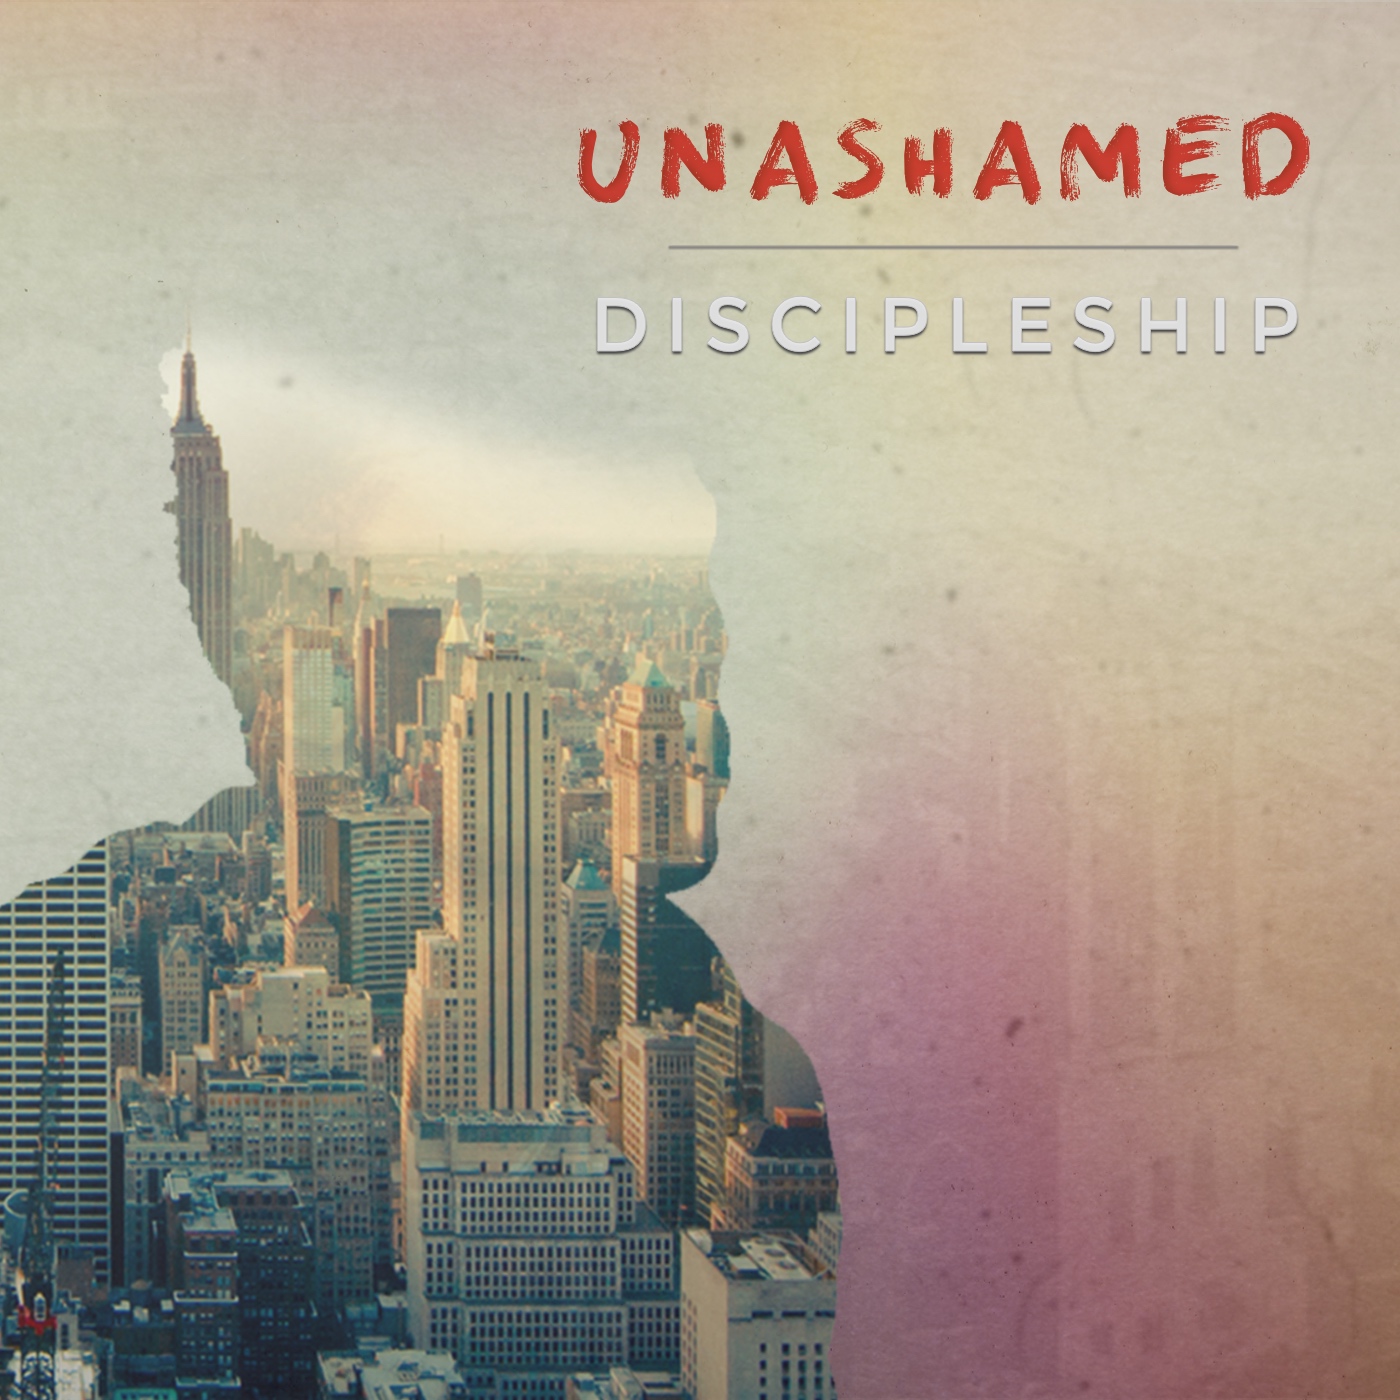 DISCIPLESHIP // 3. A Disciple is One Who Lives in Community with Other Believers